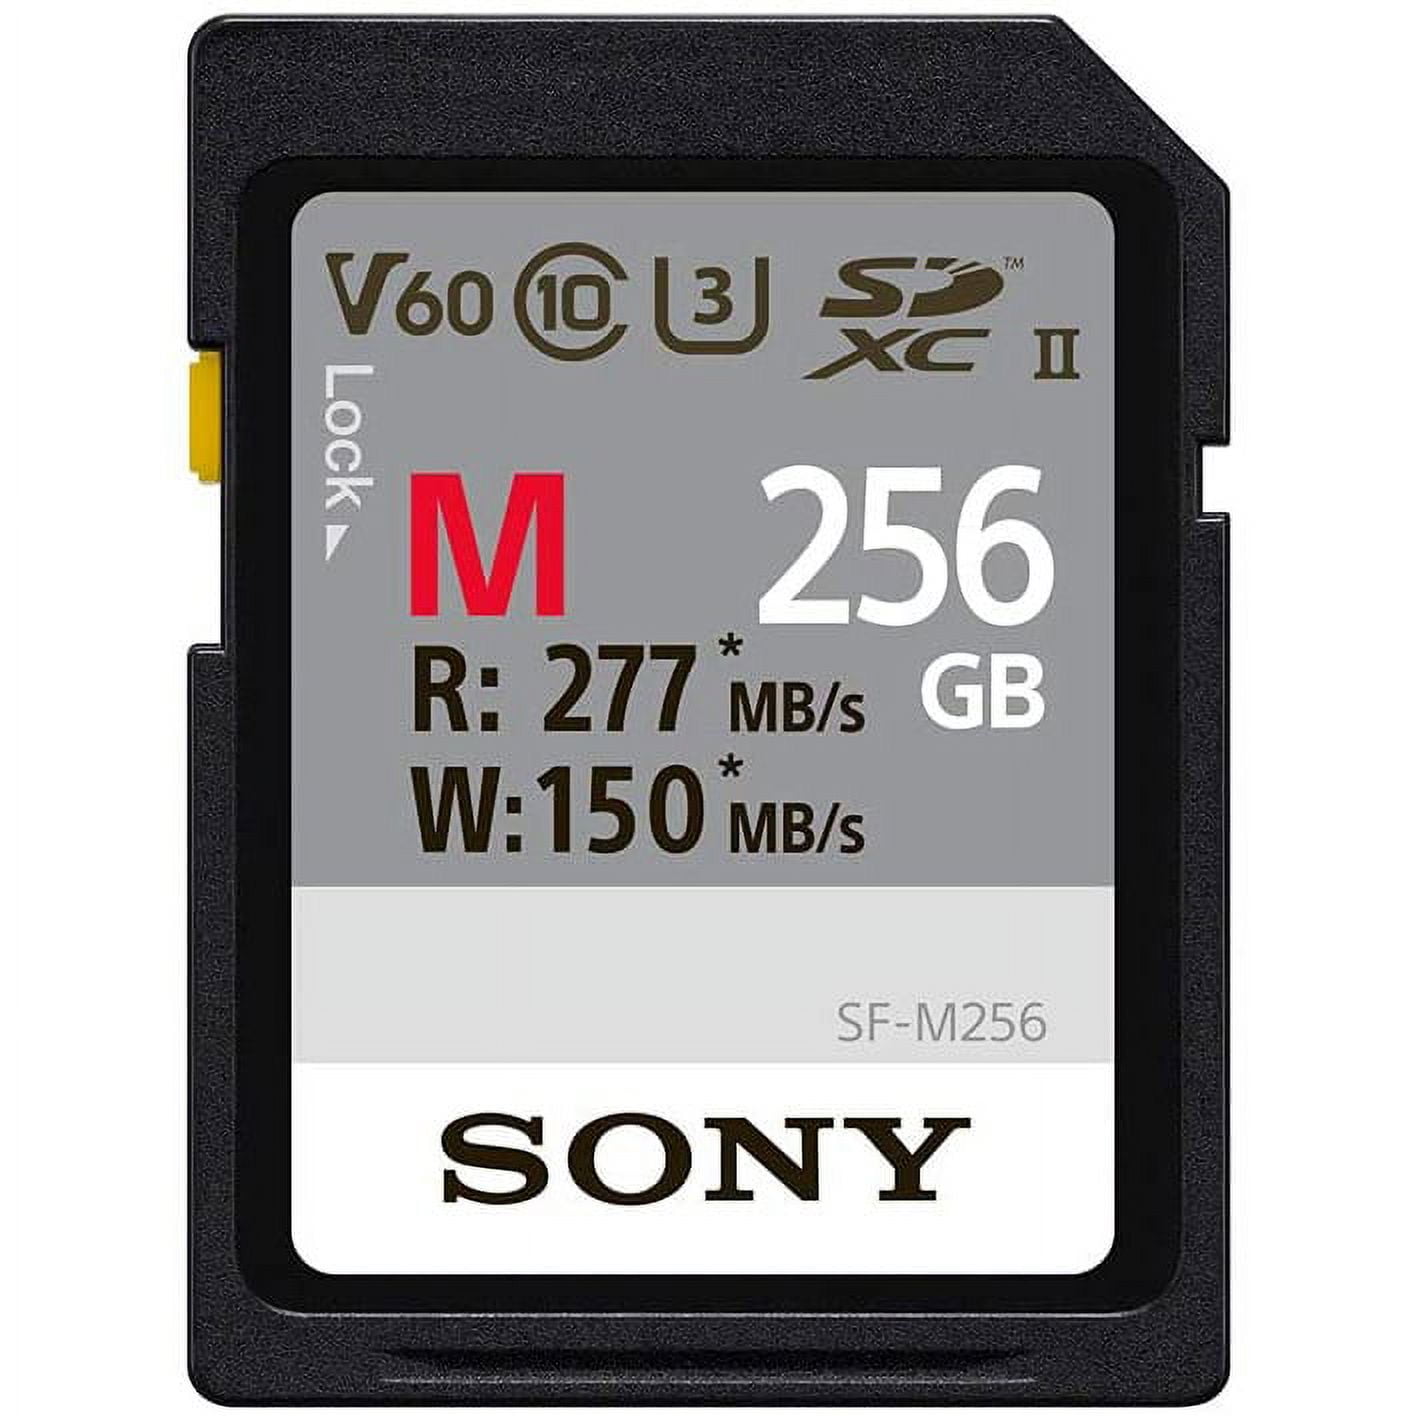 MOVE SPEED 128GB Micro SD Card, Up to 170MB/s Micro SD Memory Card, A2 U3  V60, 4K Full HD Video Recording, with Card Reader and Adapter, for Driving